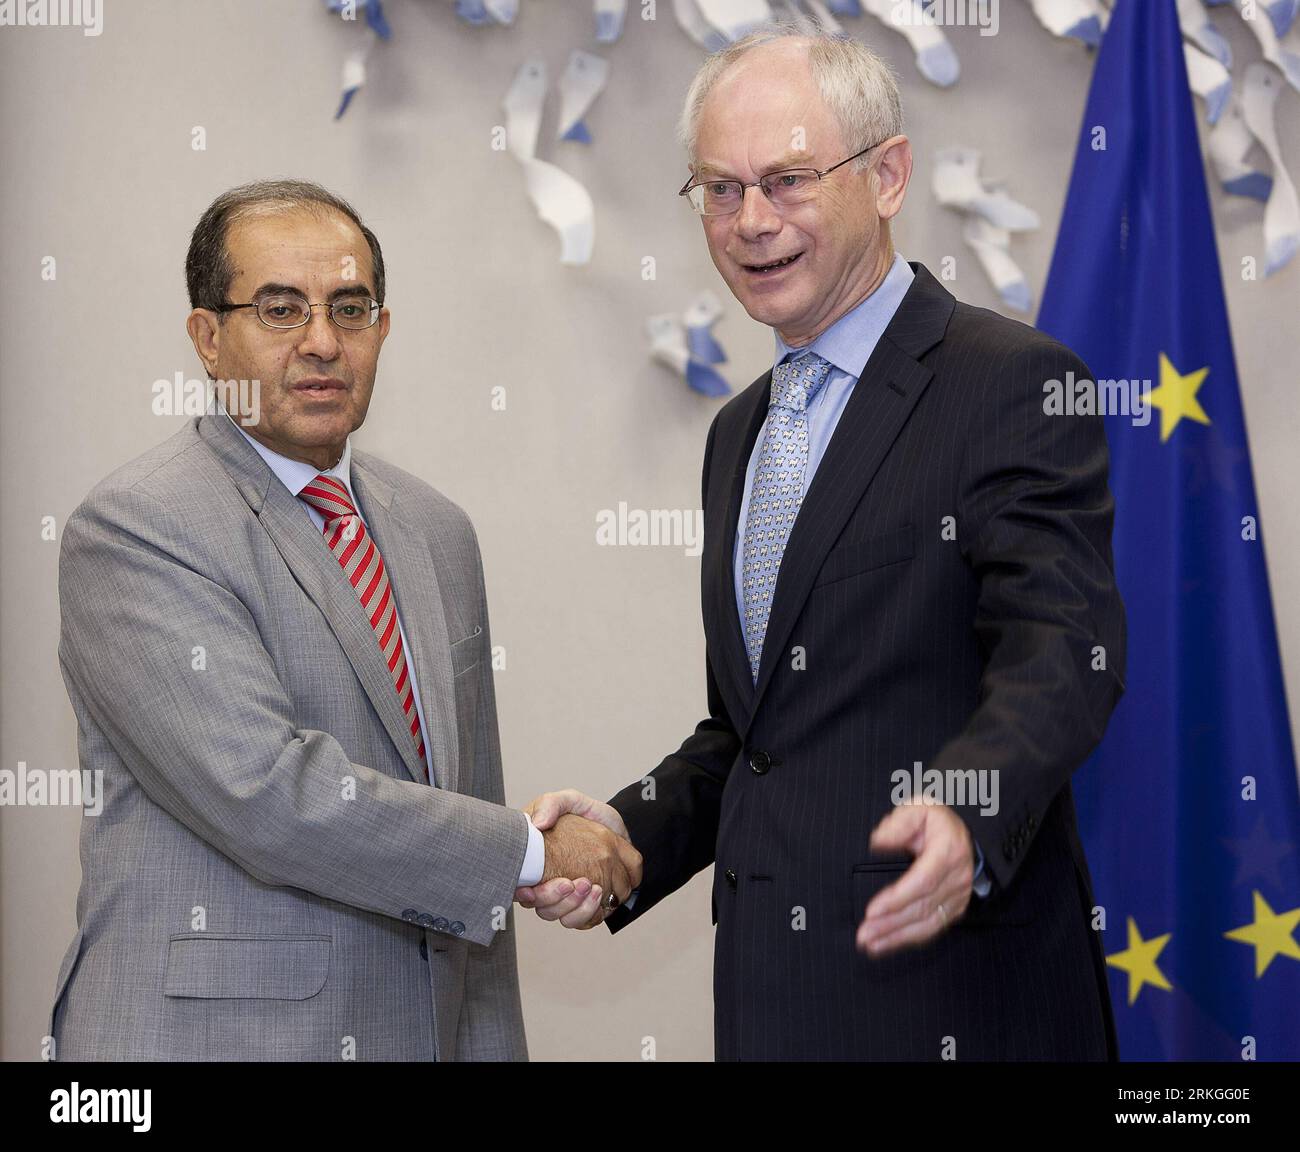 Bildnummer: 55593508  Datum: 14.07.2011  Copyright: imago/Xinhua (110714) -- BRUSSELS, July 14, 2011 (Xinhua) -- EU Council President Herman Van Rompuy(R) shakes hands with visiting Chairman of the executive board of Libyan Transitional National Council, Mahmoud Jibril, prior to a working session at the European Headquarters in Brussels July 14, 2011.(Xinhua/Thierry Monasse)(yy) (1)BELGIUM-BRUSSELS-EU-LIBYA-MEETING PUBLICATIONxNOTxINxCHN People Politik x0x xtm 2011 quadrat premiumd     Bildnummer 55593508 Date 14 07 2011 Copyright Imago XINHUA  Brussels July 14 2011 XINHUA EU Council President Stock Photo